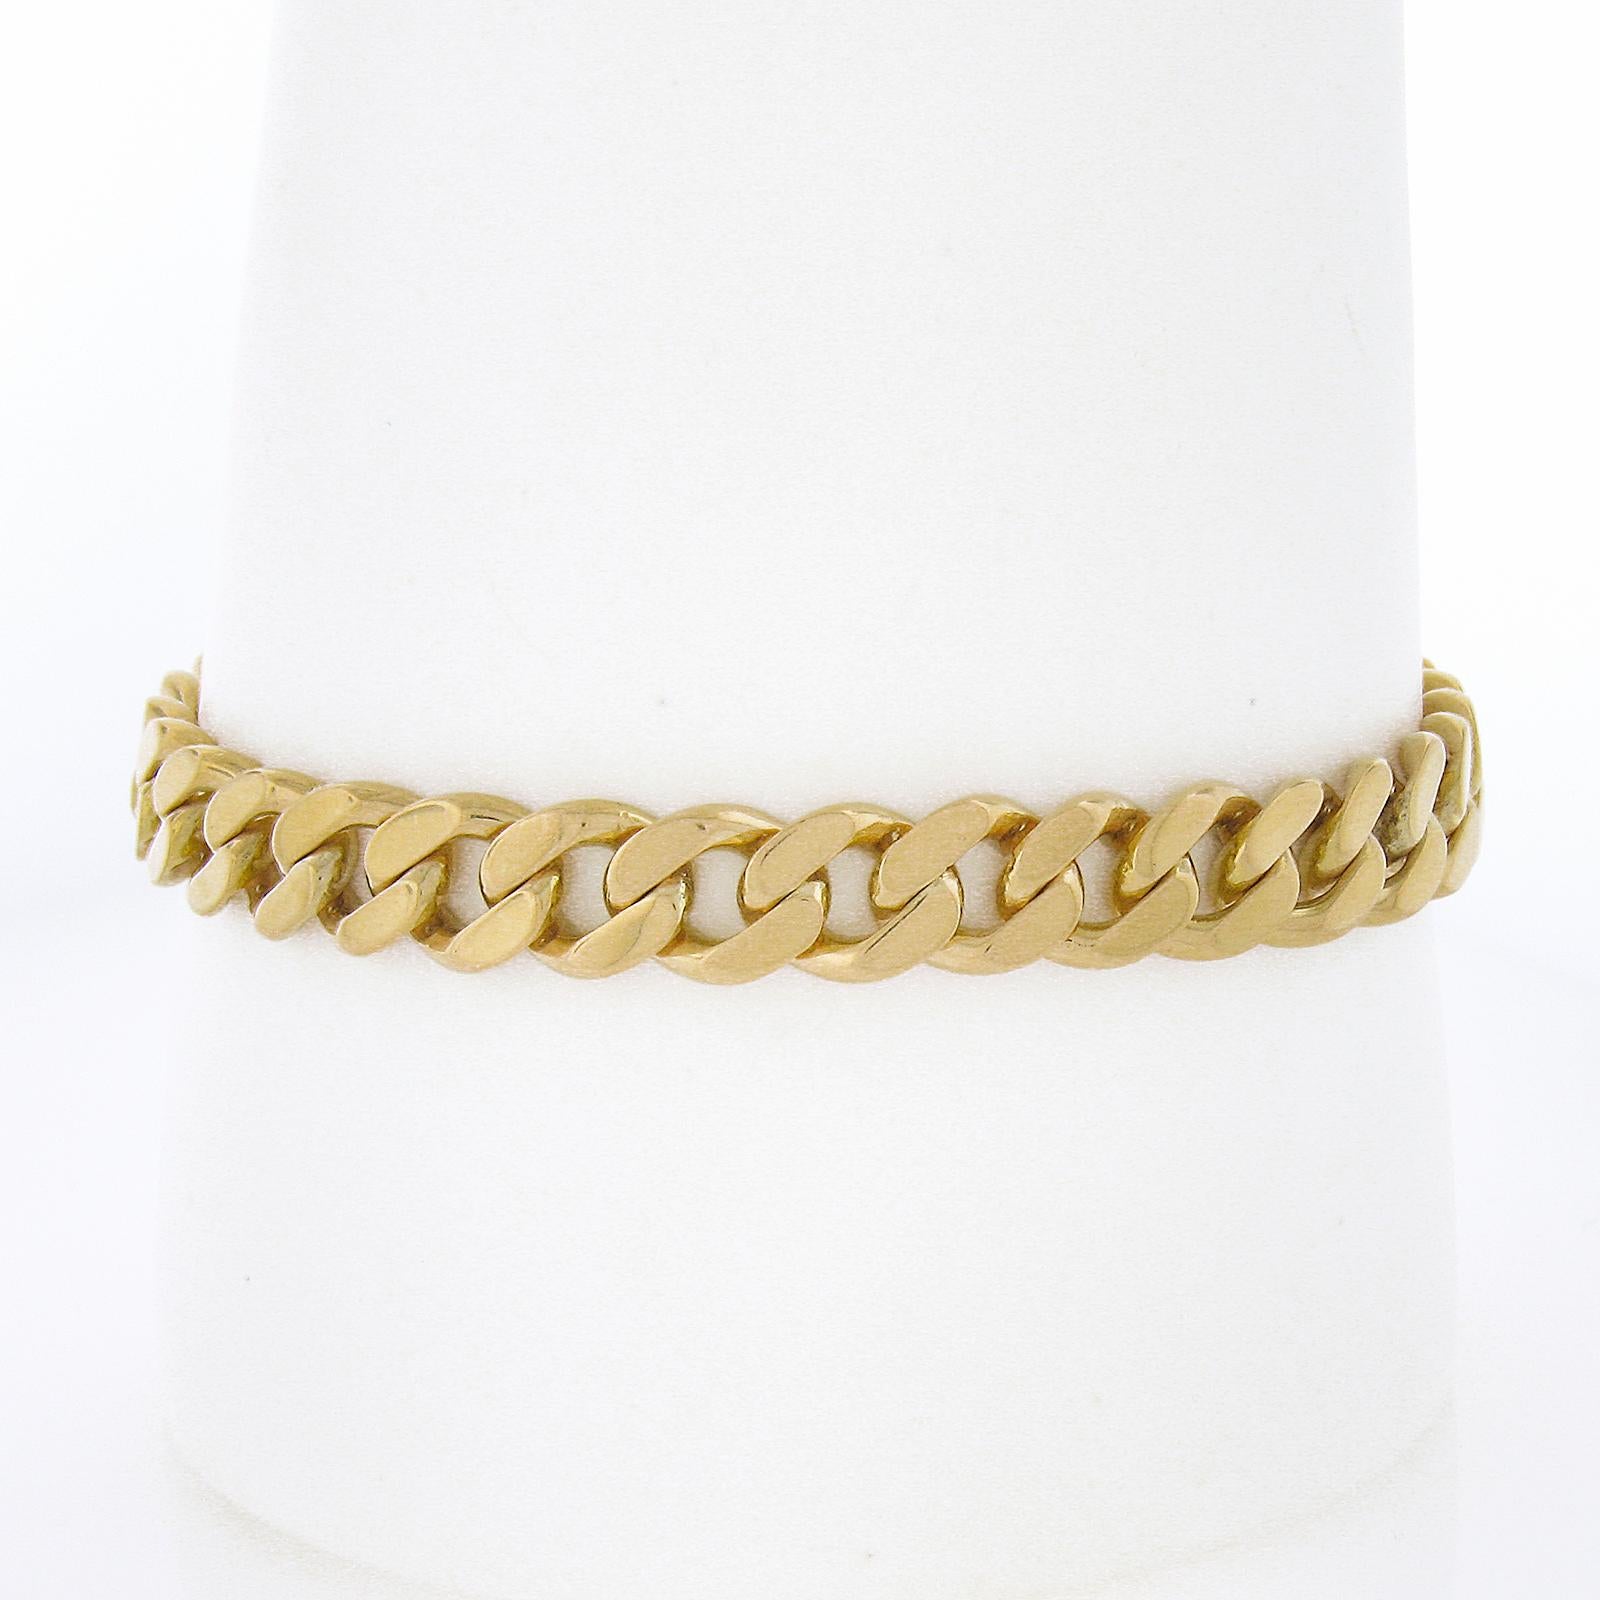 Material: Solid 18k Yellow Gold 
Weight: 29.41 Grams
Chain Type: Flat Curb/Cuban Link
Chain Length:	Will comfortably fit up to a 7.5 inch wrist (fitted on a wrist)
Chain Width: 7.7mm
Chain Thickness: 2.4mm rise off the wrist
Clasp: Box Clasp w/ Side